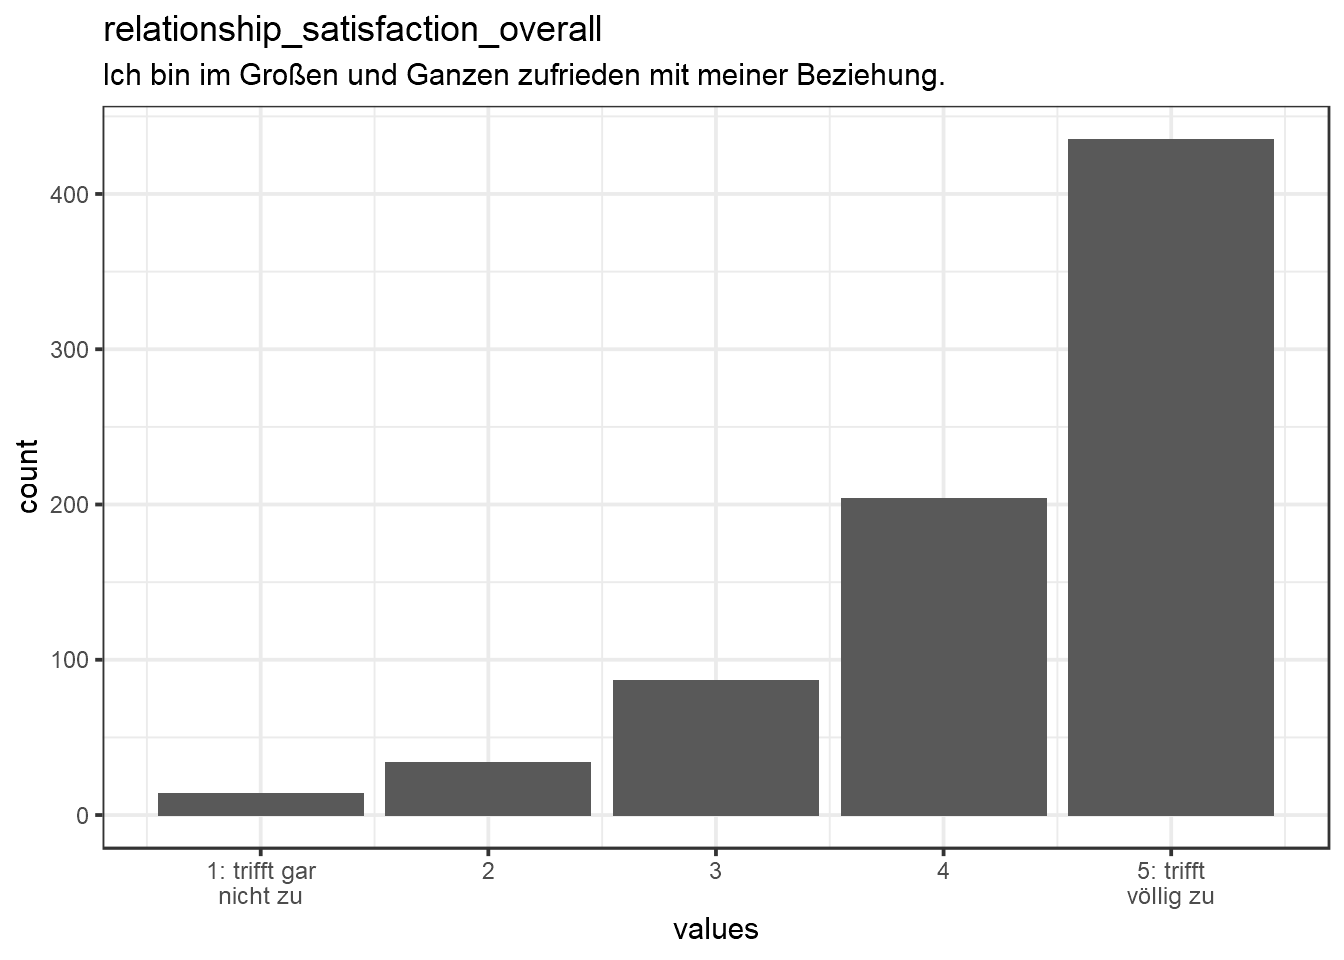 Distribution of values for relationship_satisfaction_overall